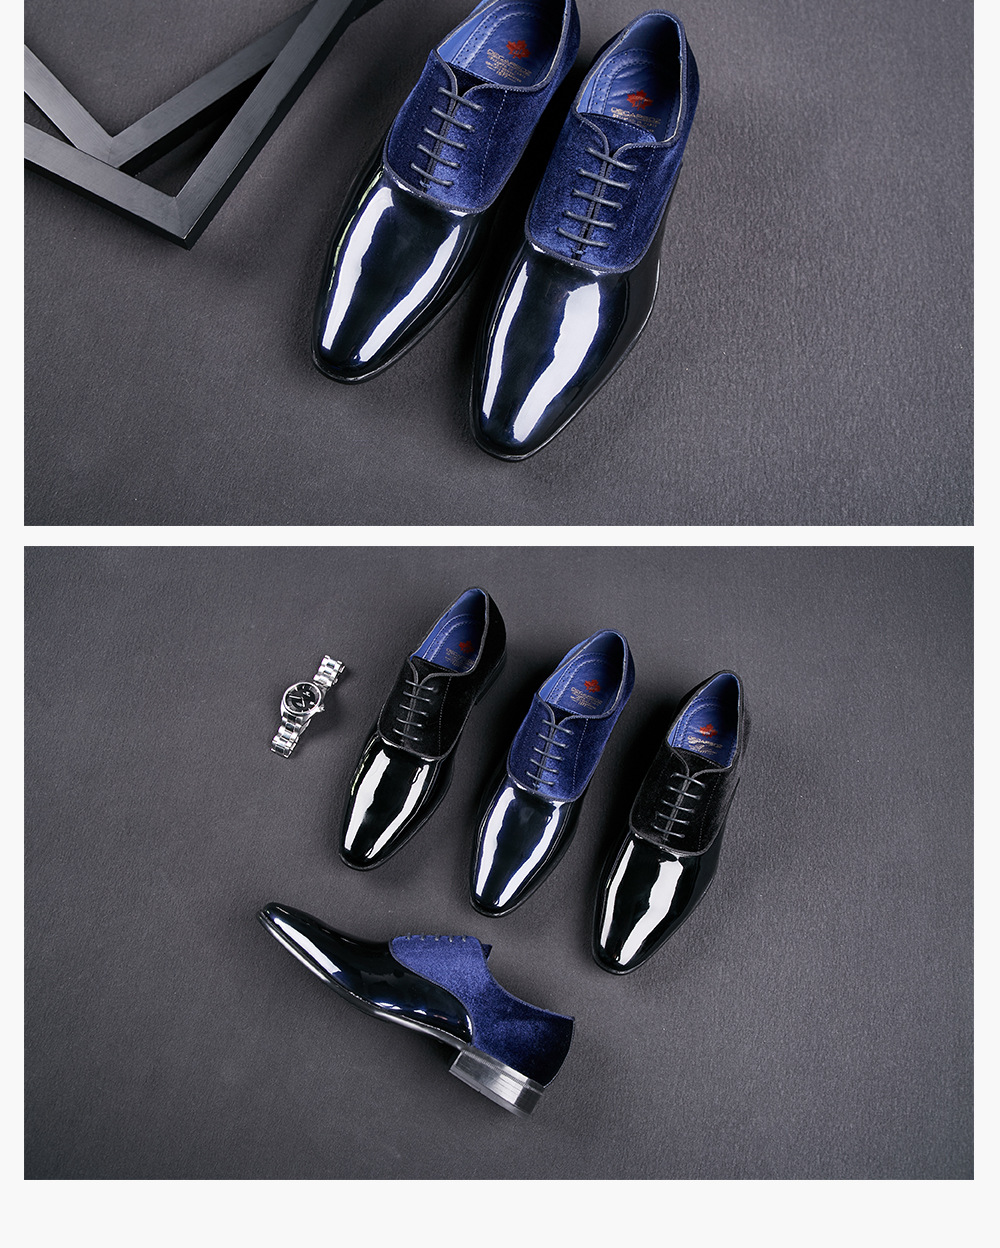 Formal-Shoes-detail page template 02_13.jpg